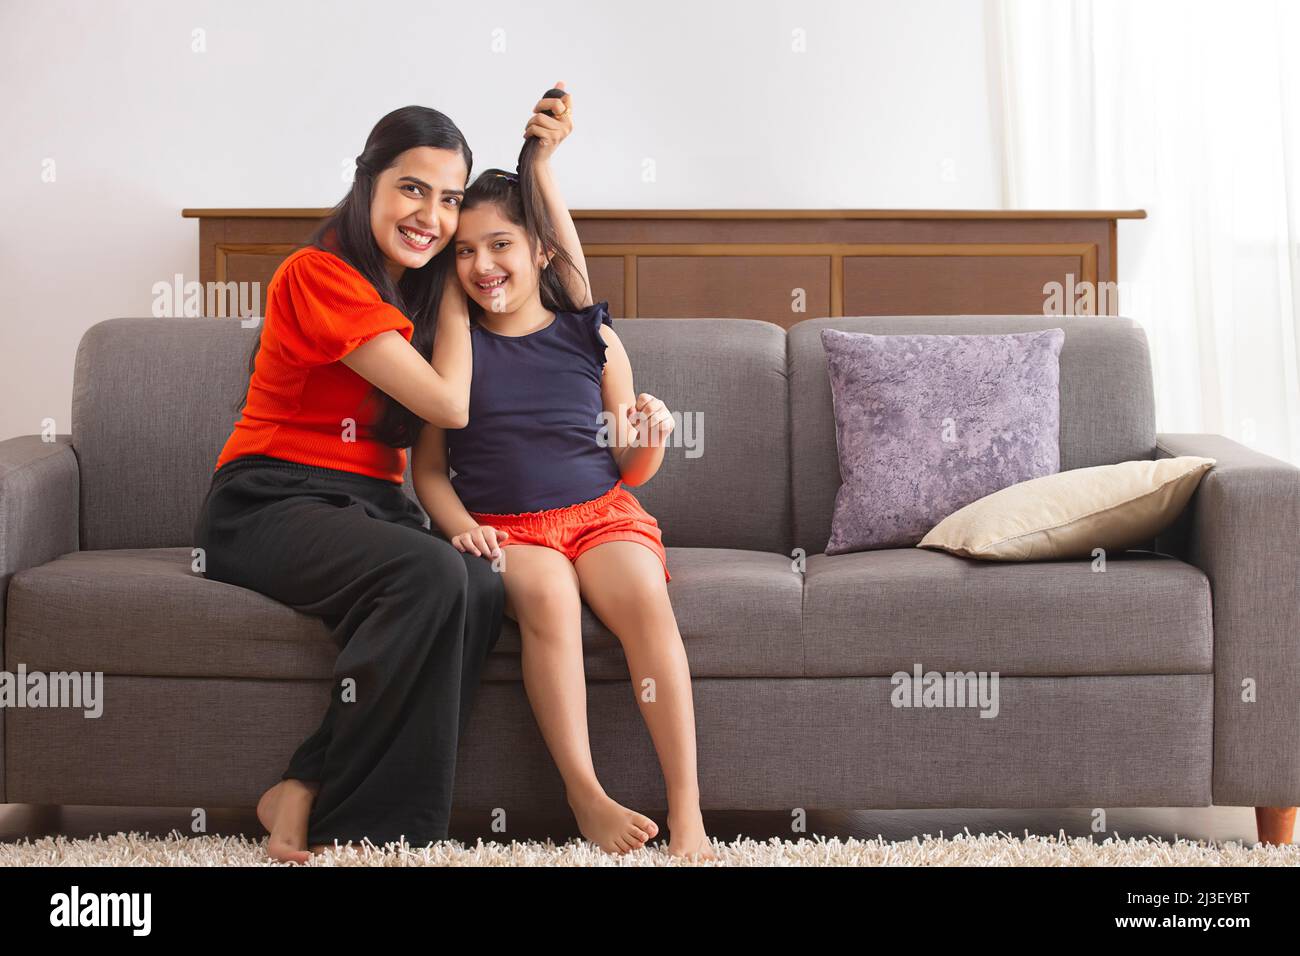 Mother having fun with her daughter by pulling hair Stock Photo